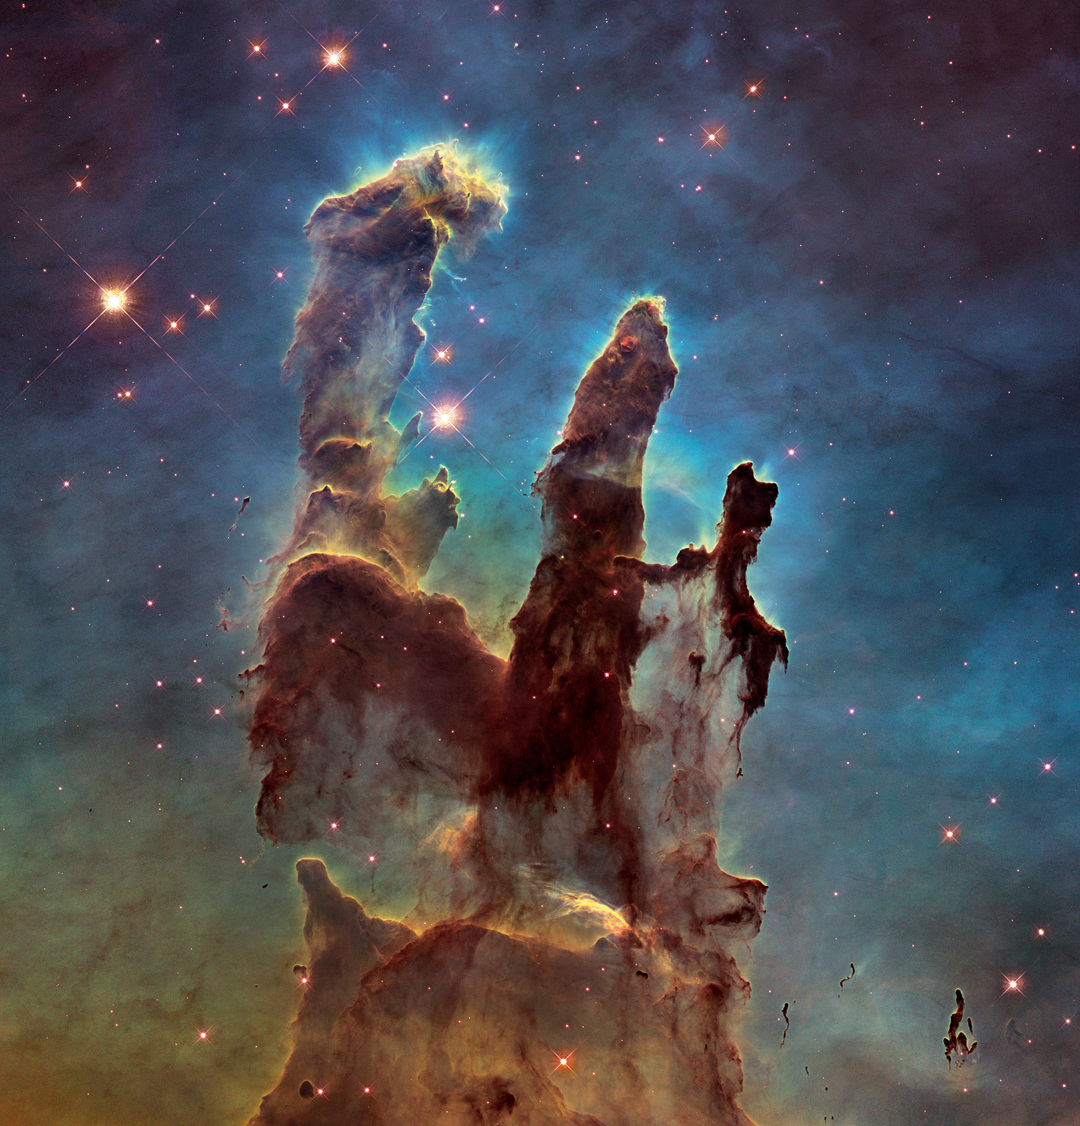 Should we look at deep space images as works of art? 